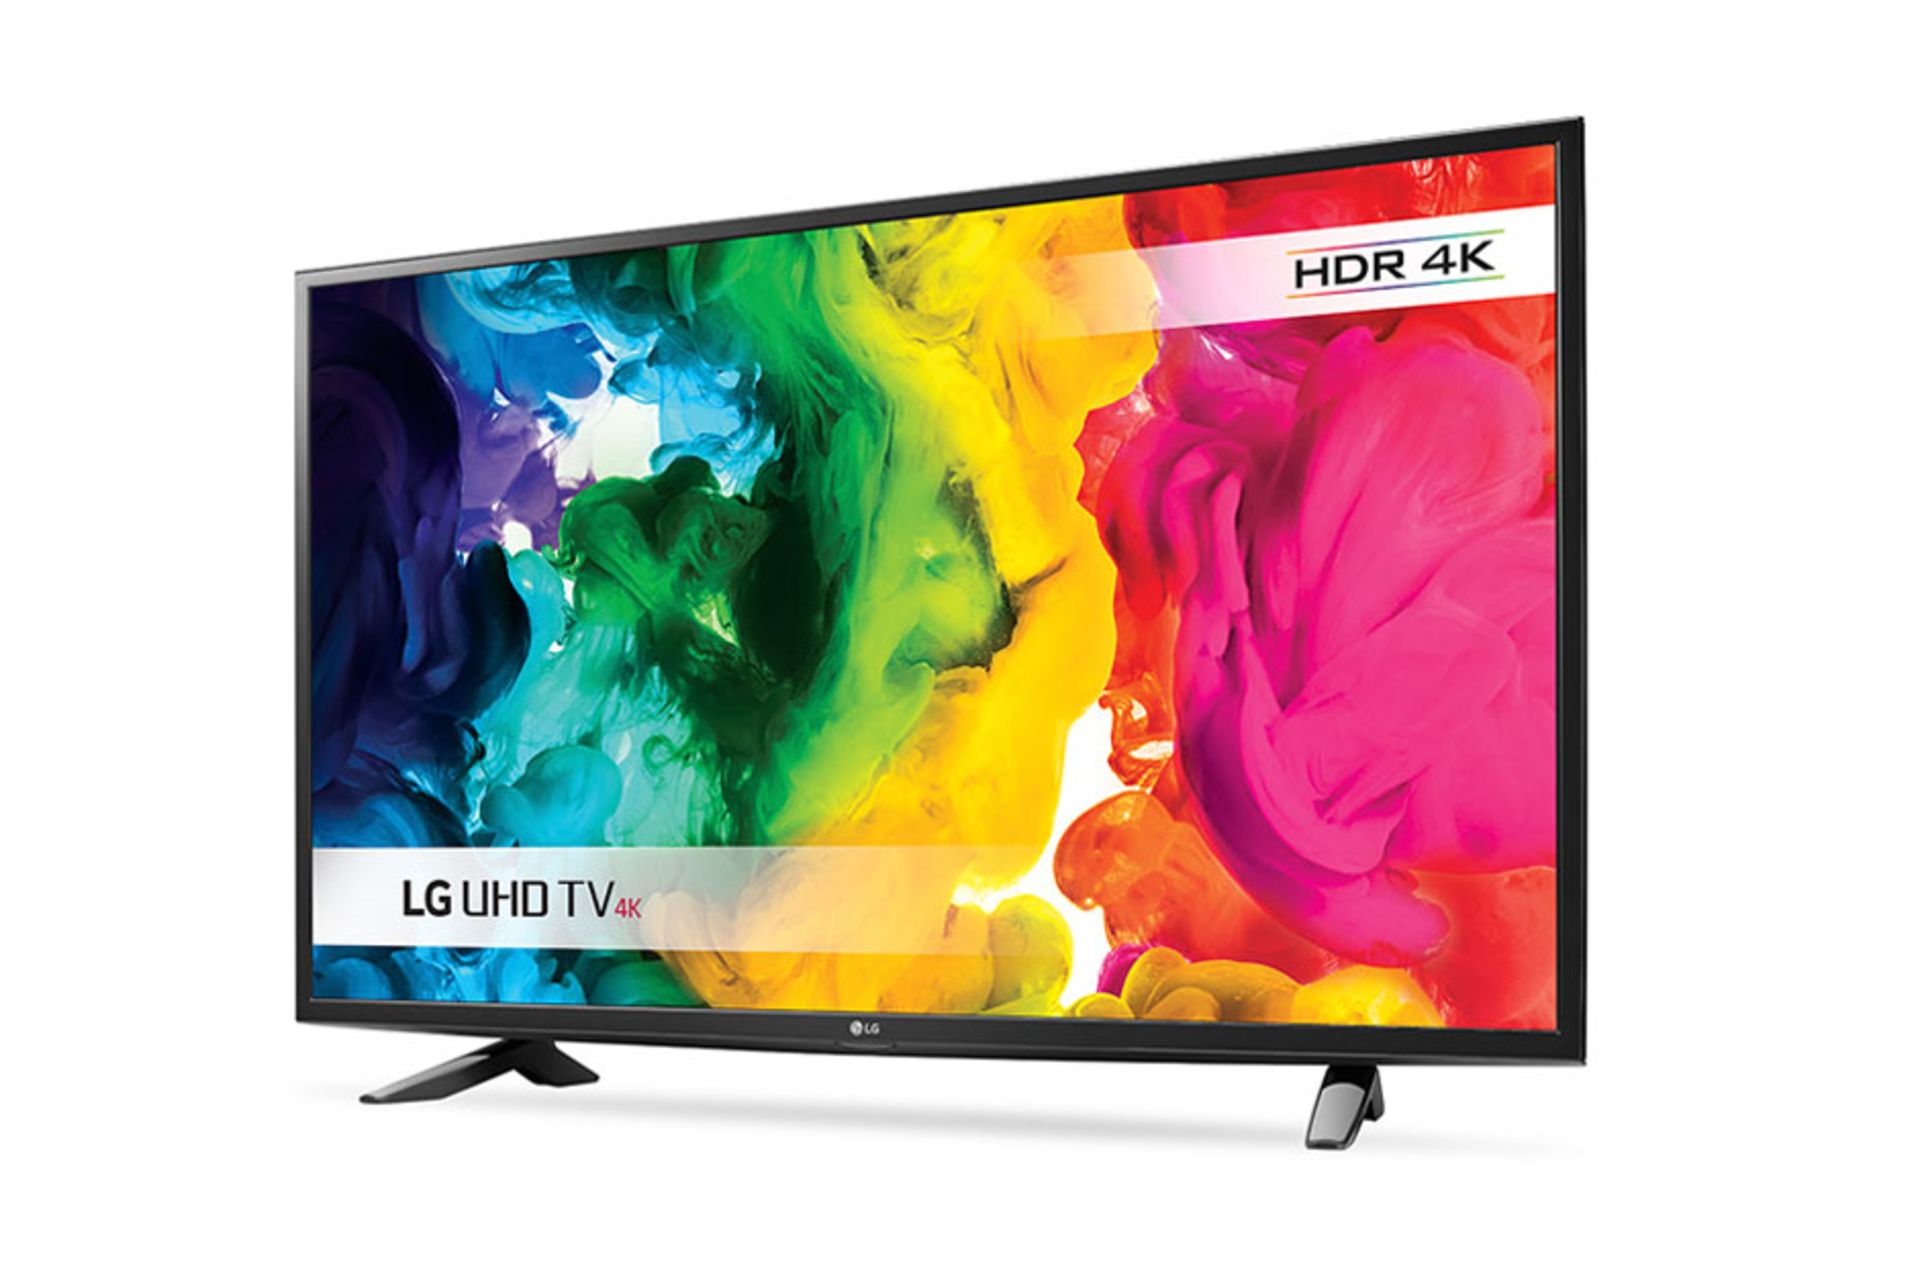 1 BOXED LG 49UH603V 49" 4K HDR TV WITH WEBOS, NO STAND OR REMOTE, POWERS ON BUT NO PICTURE (POSSIBLE